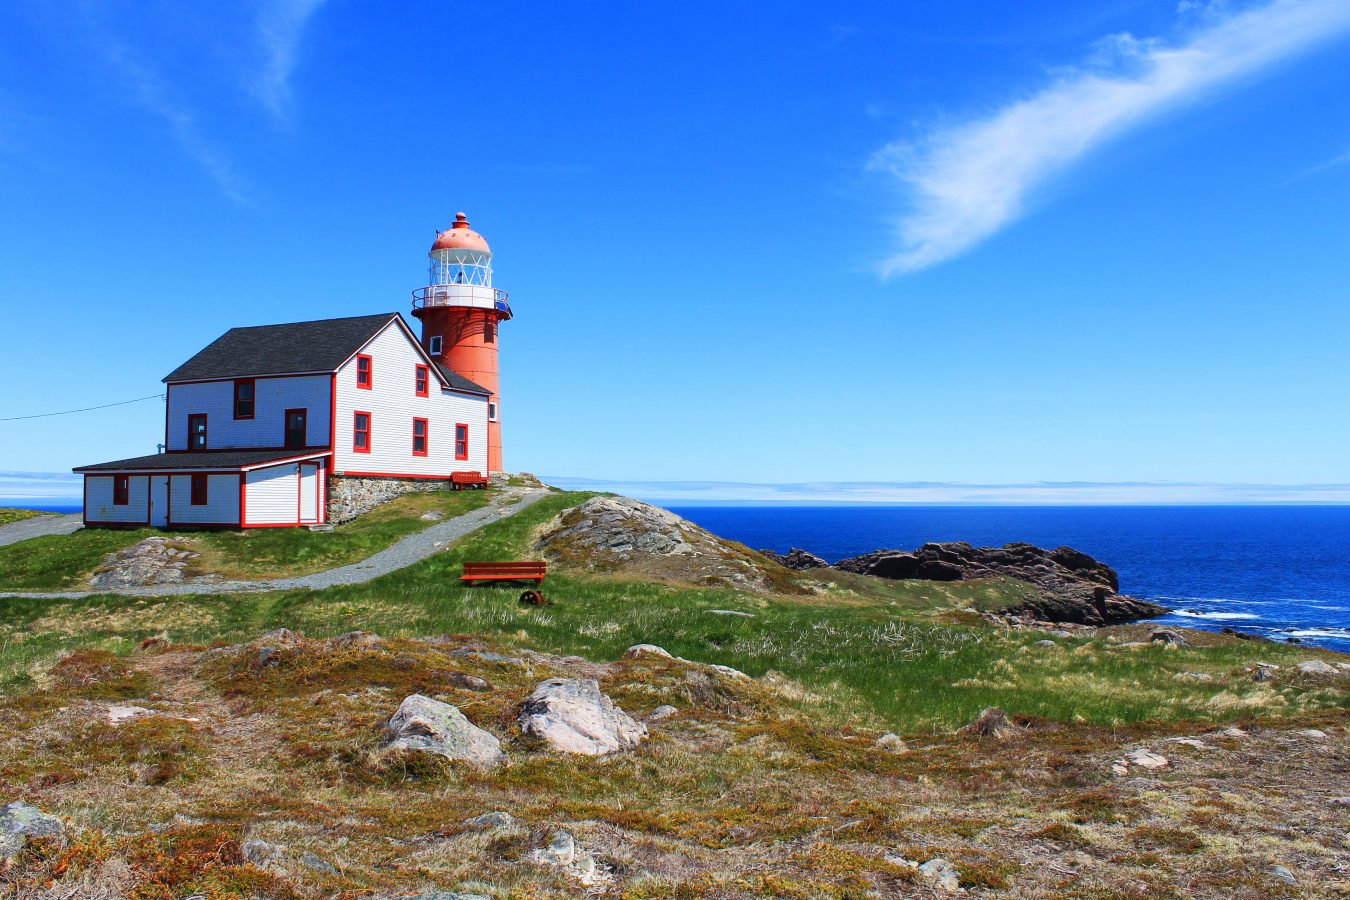 View of Ferryland Downs and the lighthouse, looking out toward the Atlantic Ocean, Ferryland, Newfoundland.